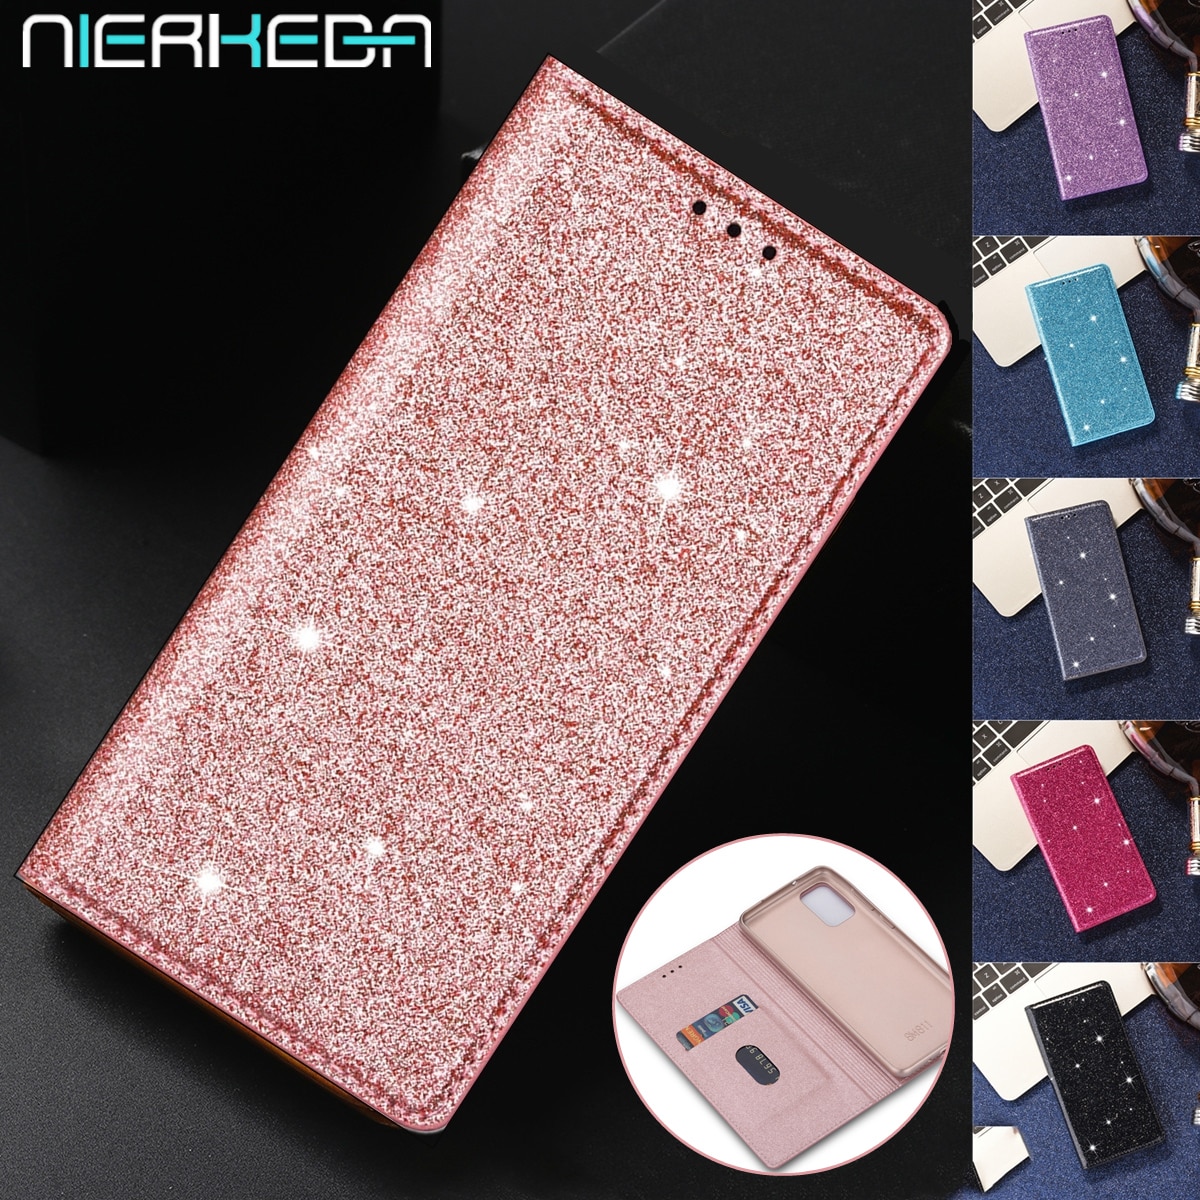 Glitter Leather Magnetic Flip Case for Huawei Mate 20 10 Pro P Smart P40 P30 P20 Lite Pro Y6 Y7 2019 Bling Wallet bag Card Cover